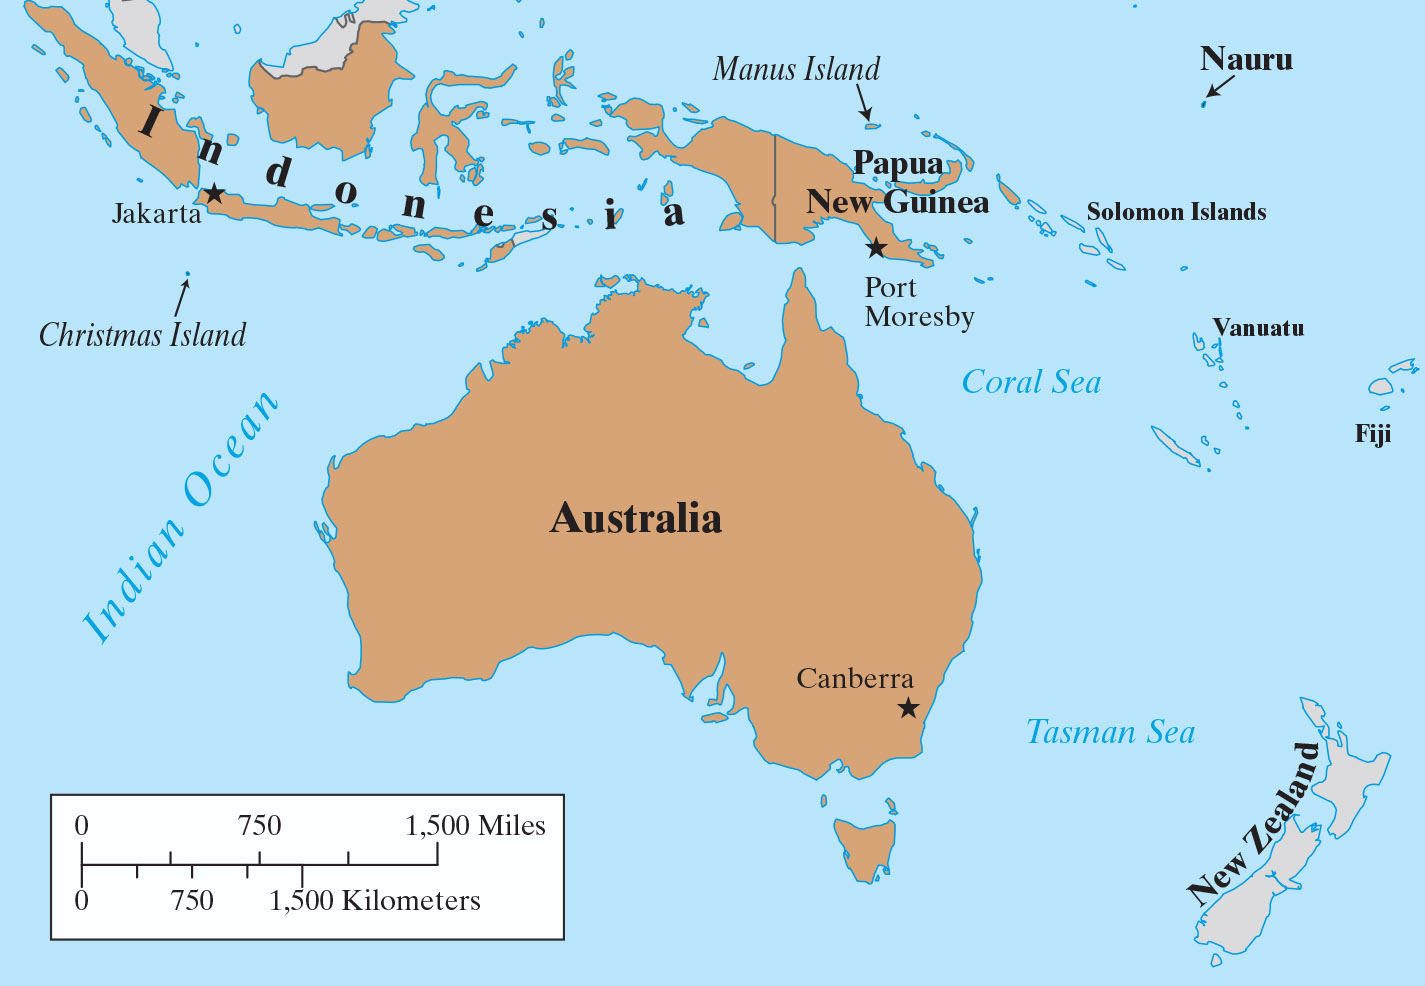 Map of Australia with Indonesia, Papua New Guinea and New Zealand